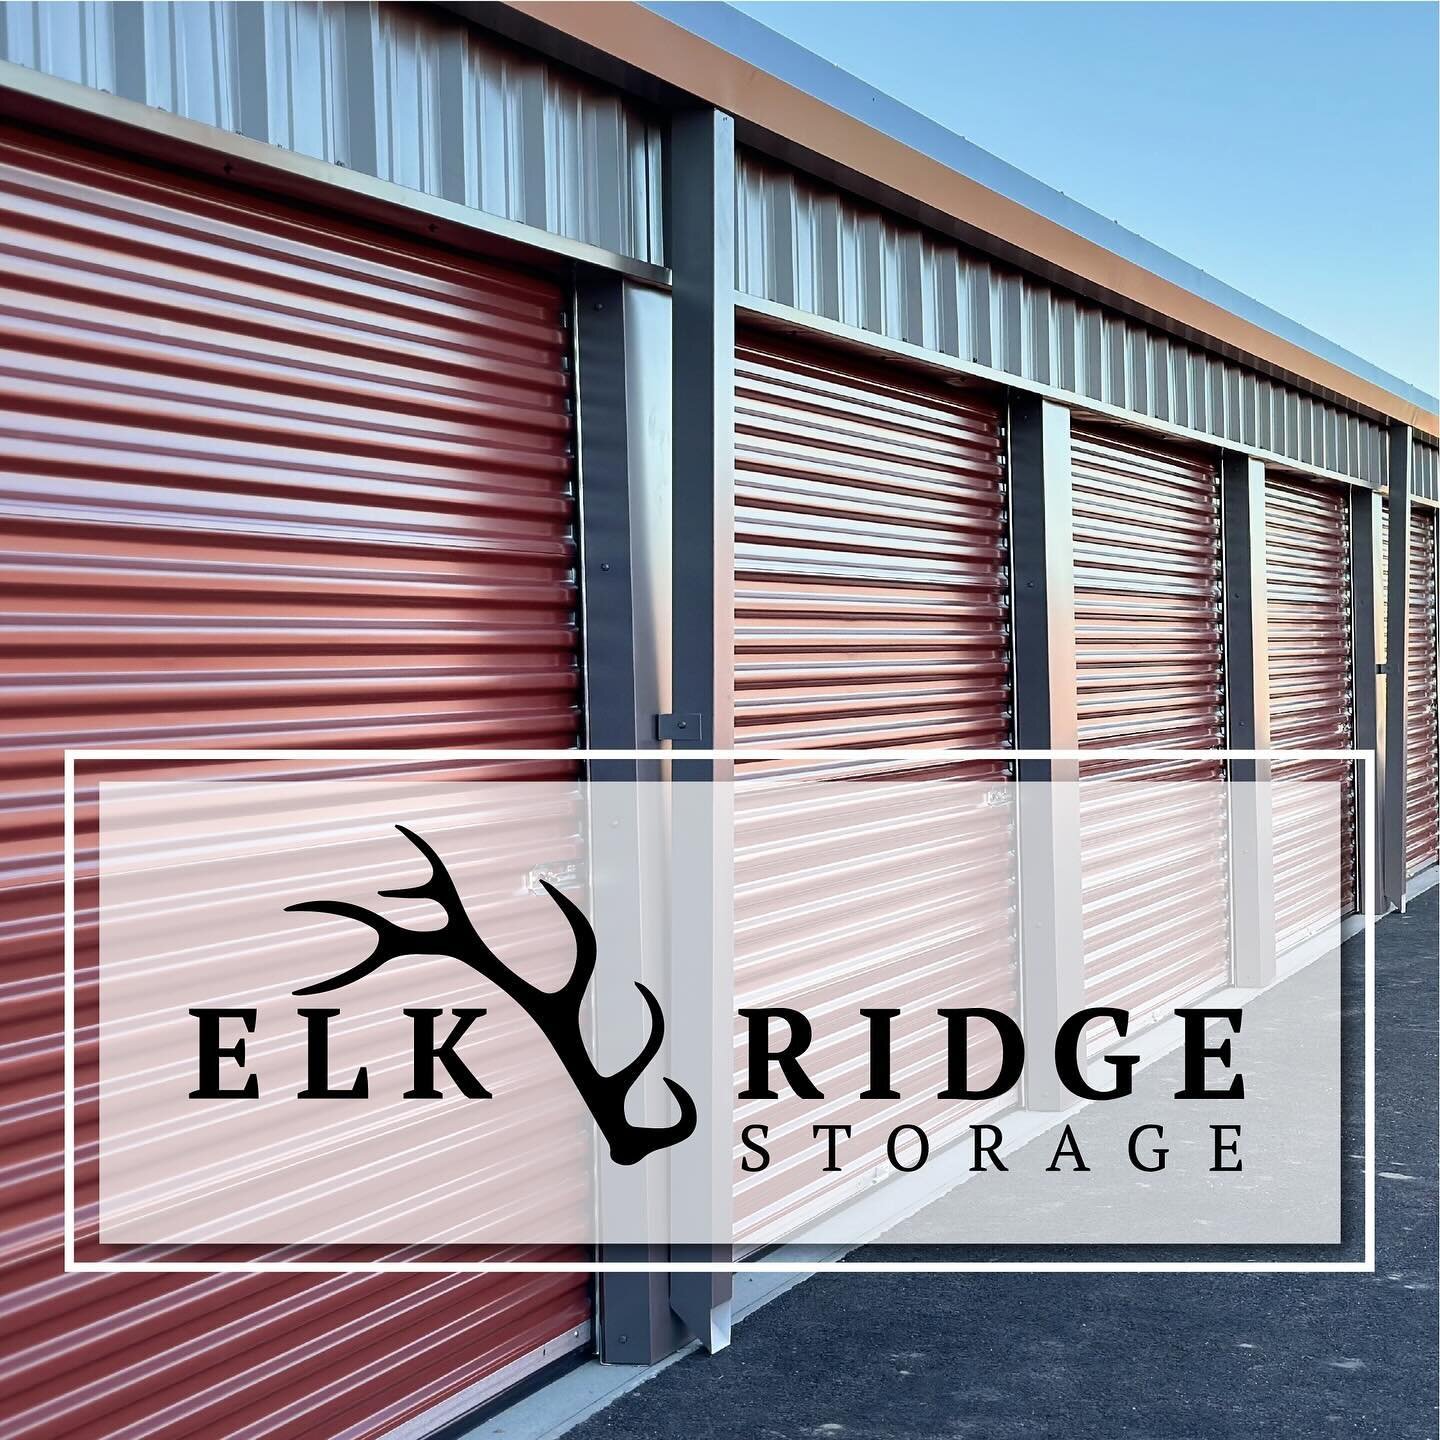 Our most recent BBG project brings a new build and a new business to Three Forks, MT.  Elk Ridge Storage is located in the Elk Ridge Subdivision off highway 287 and Price Road just north of the Wheat Montana I-90 exit.  Brand new clean self-service s